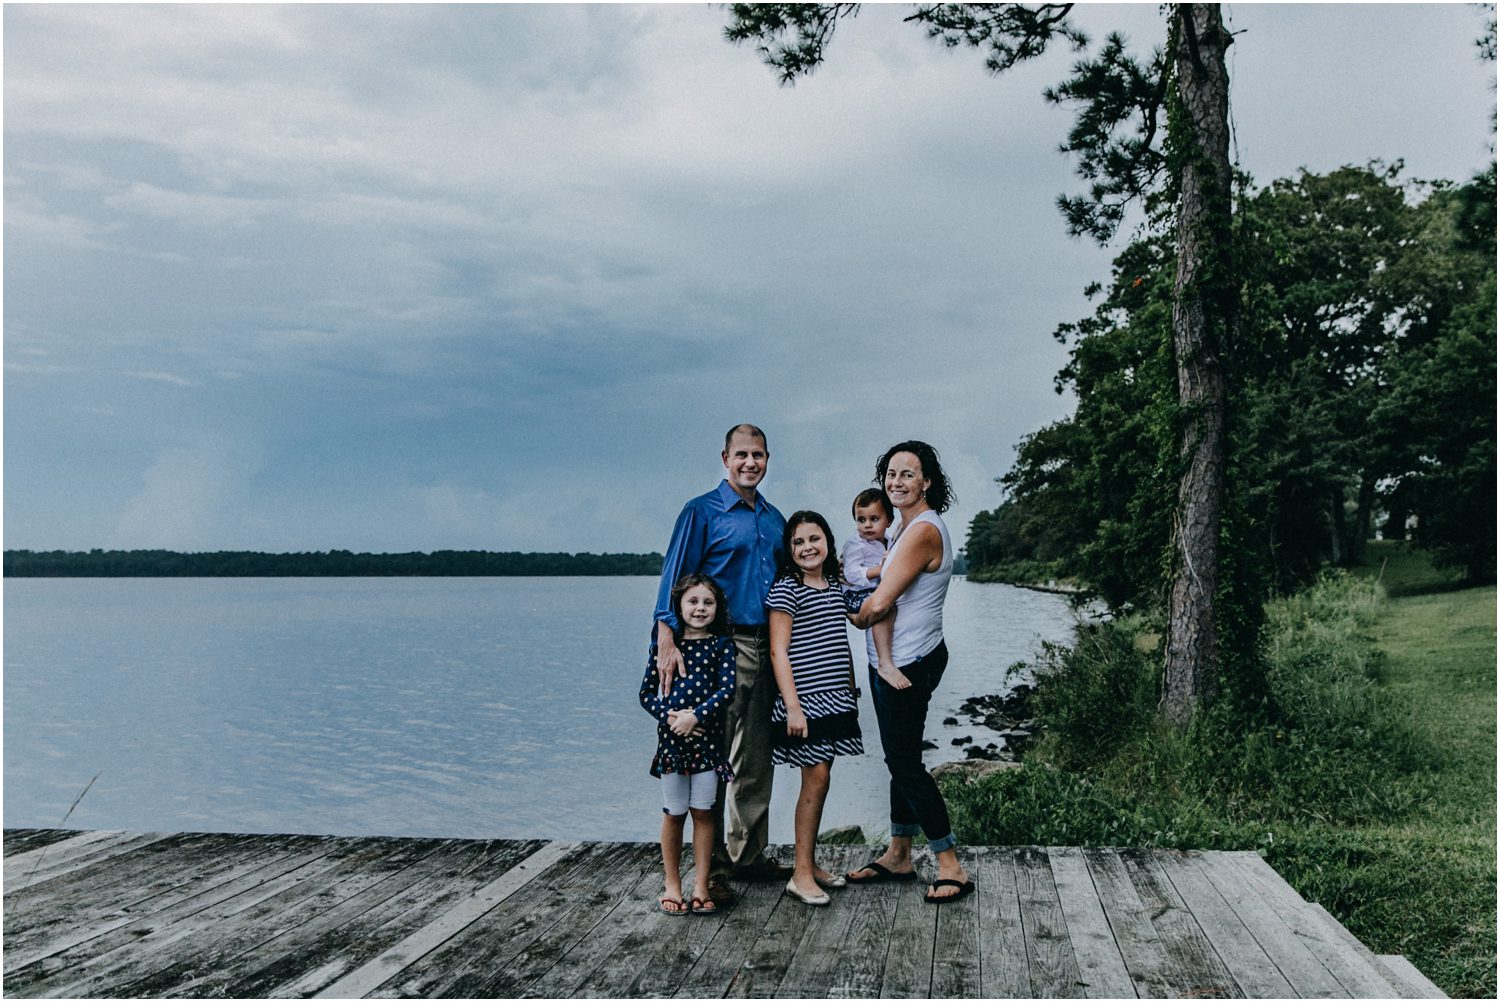 Camp Lejune, NC, Family Vacation Photographer